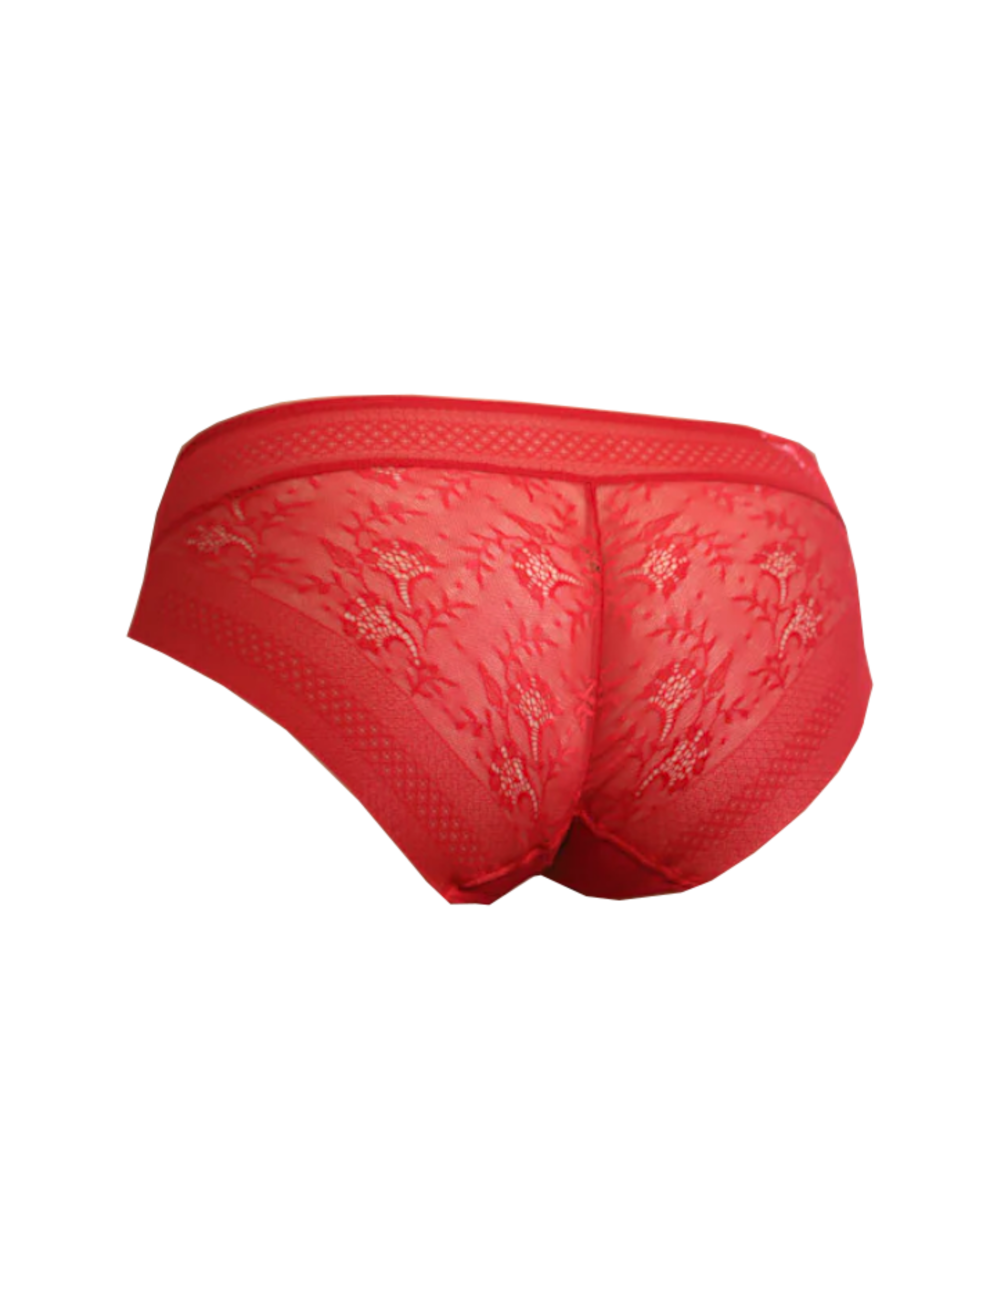 Slip femme invisible rouge